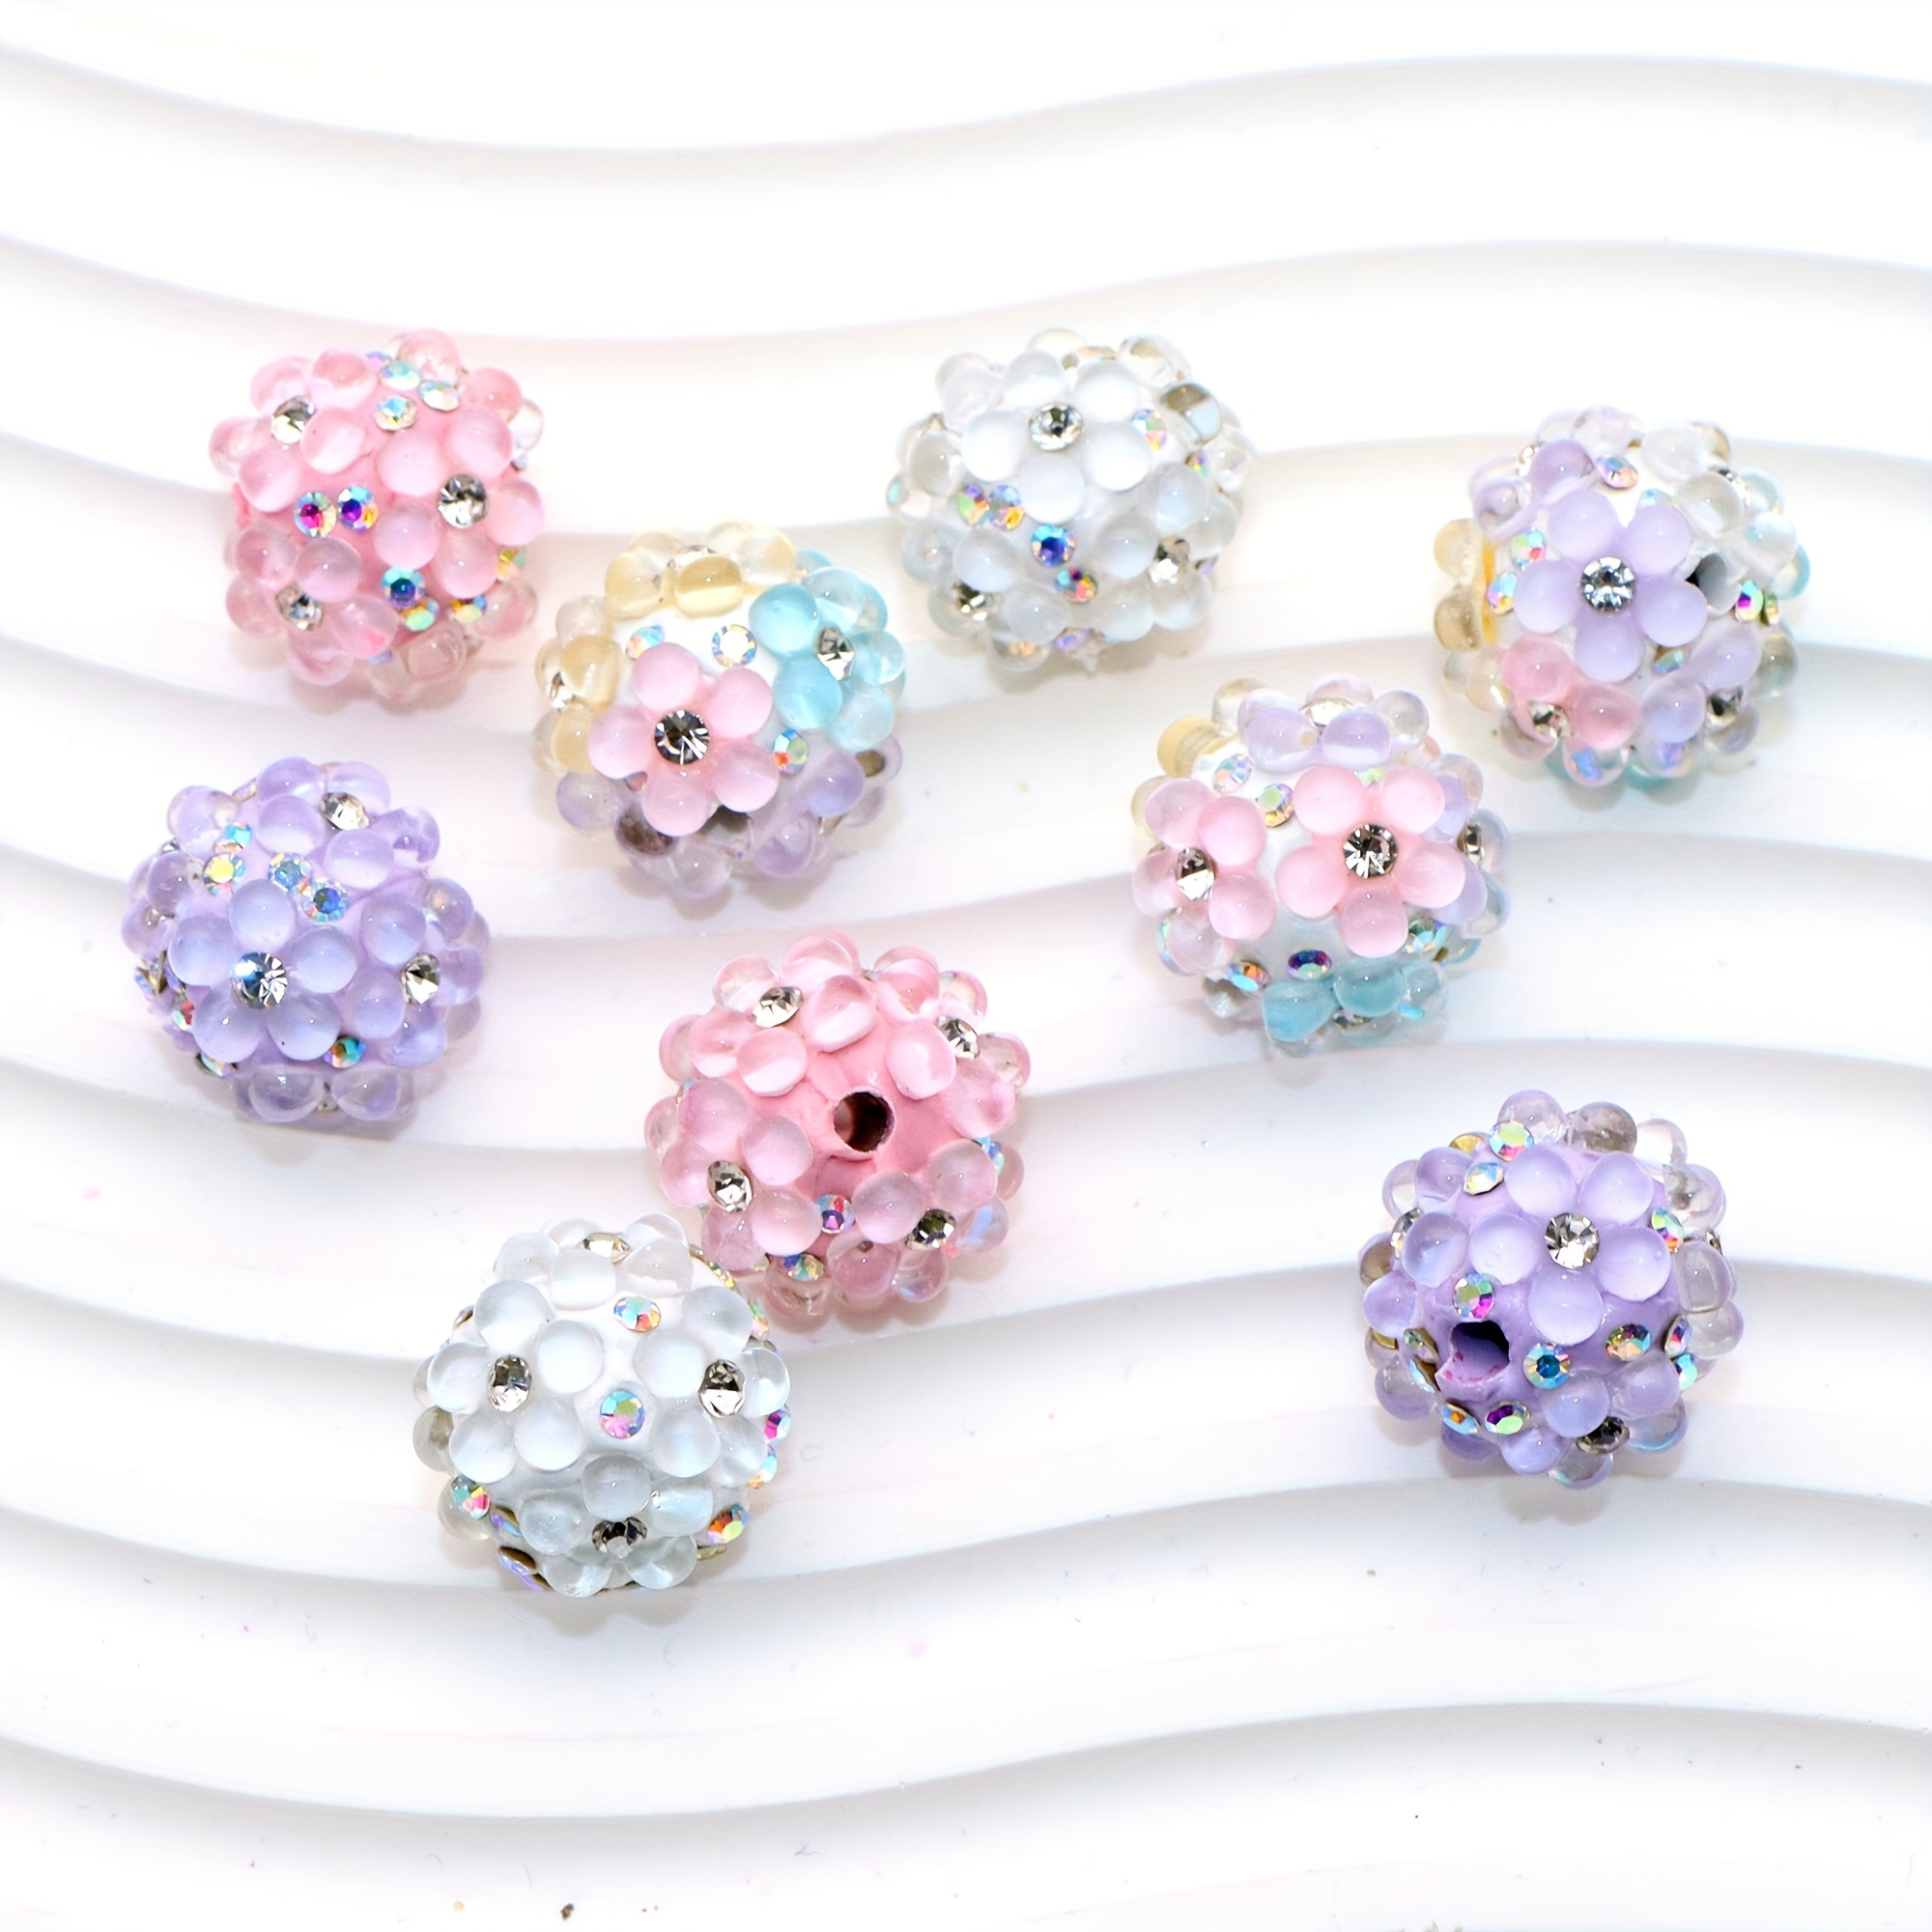 

1 Pc 20mm Acrylic Beads, Flower-shaped Rhinestone Ball Beads, Loose Spacer Beads With Hole For Diy Jewelry Making, Bracelet, Necklace, Earrings, Charm Bangle Decor Crafts